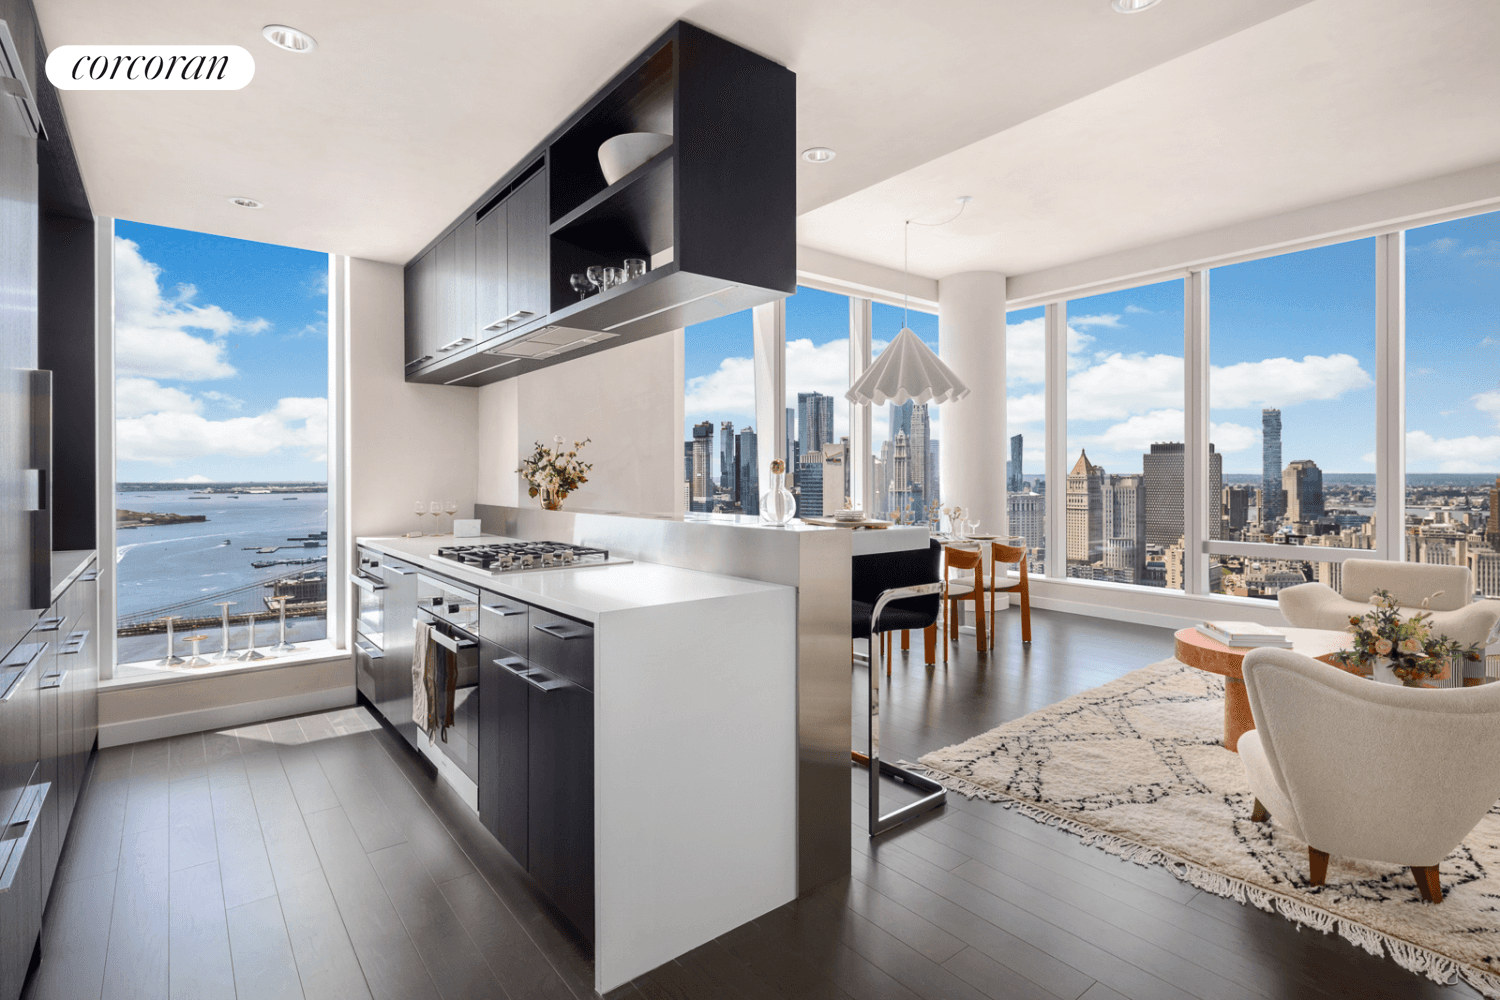 ONE MANHATTAN SQUARE OFFERS ONE OF THE LAST 20 YEAR TAX ABATEMENTS AVAILABLE IN NEW YORK CITYResidence 22A is a 1, 162 square foot two bedroom, two bathroom with an ...